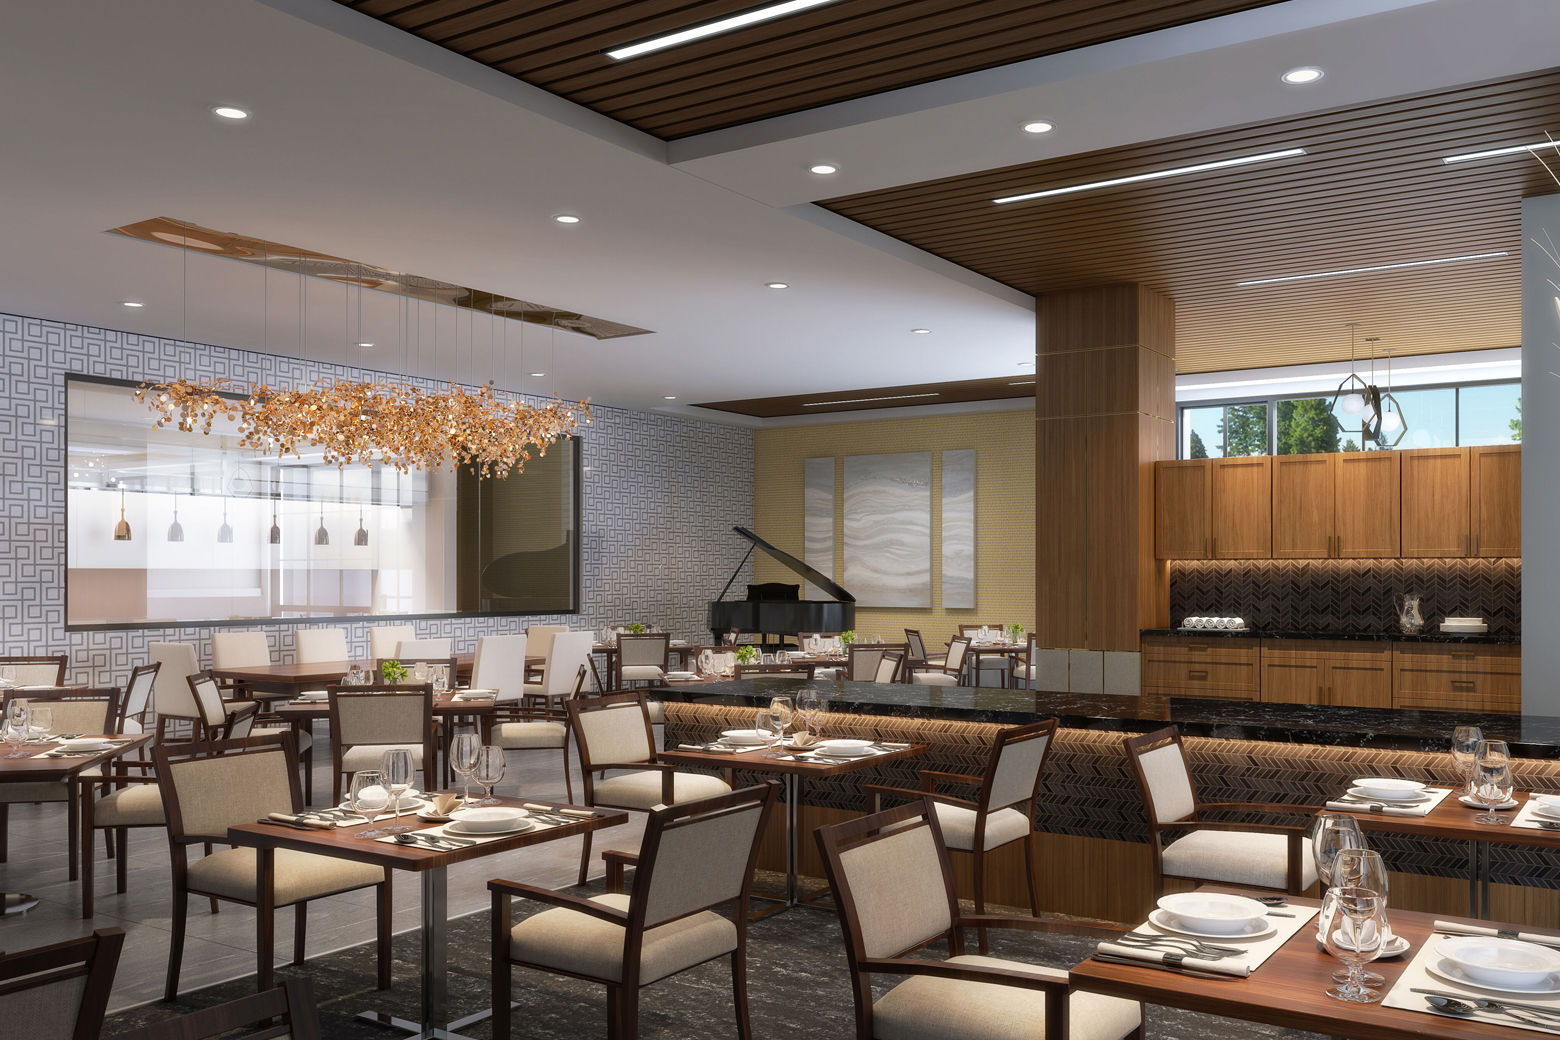 Renderings of the Modena Reserve at Kensington senior living community. The upscale development includes 135 apartments, a 10,000-square-foot courtyard, multiple restaurants, a full-service wine bar, fitness center and a penthouse lounge.